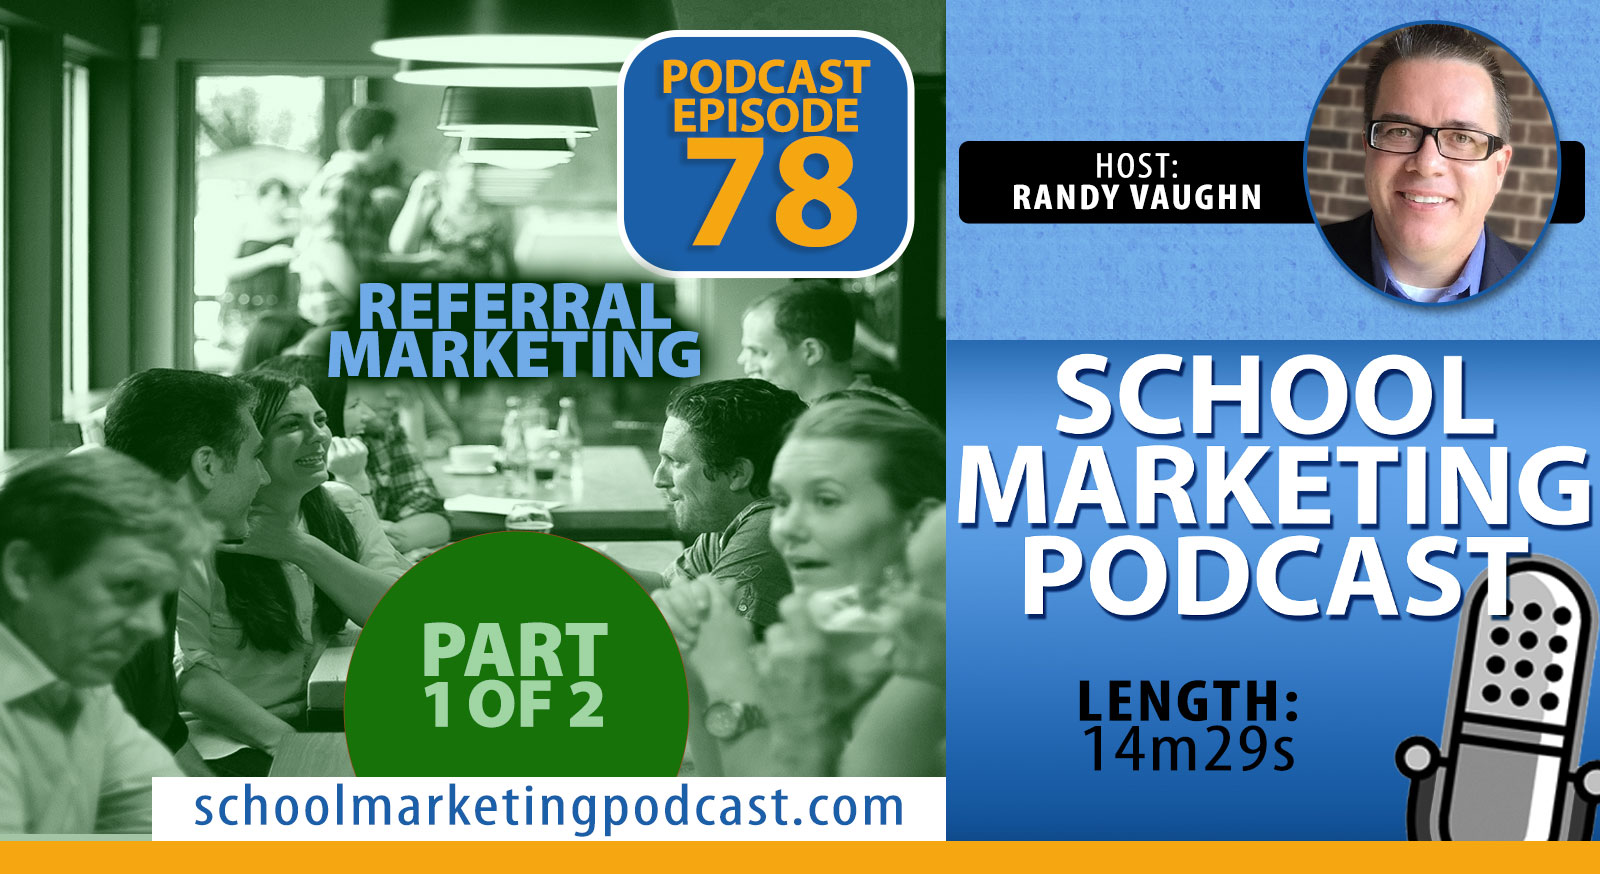 Podcast - Referral Marketing & WOM - Part 1 of 2